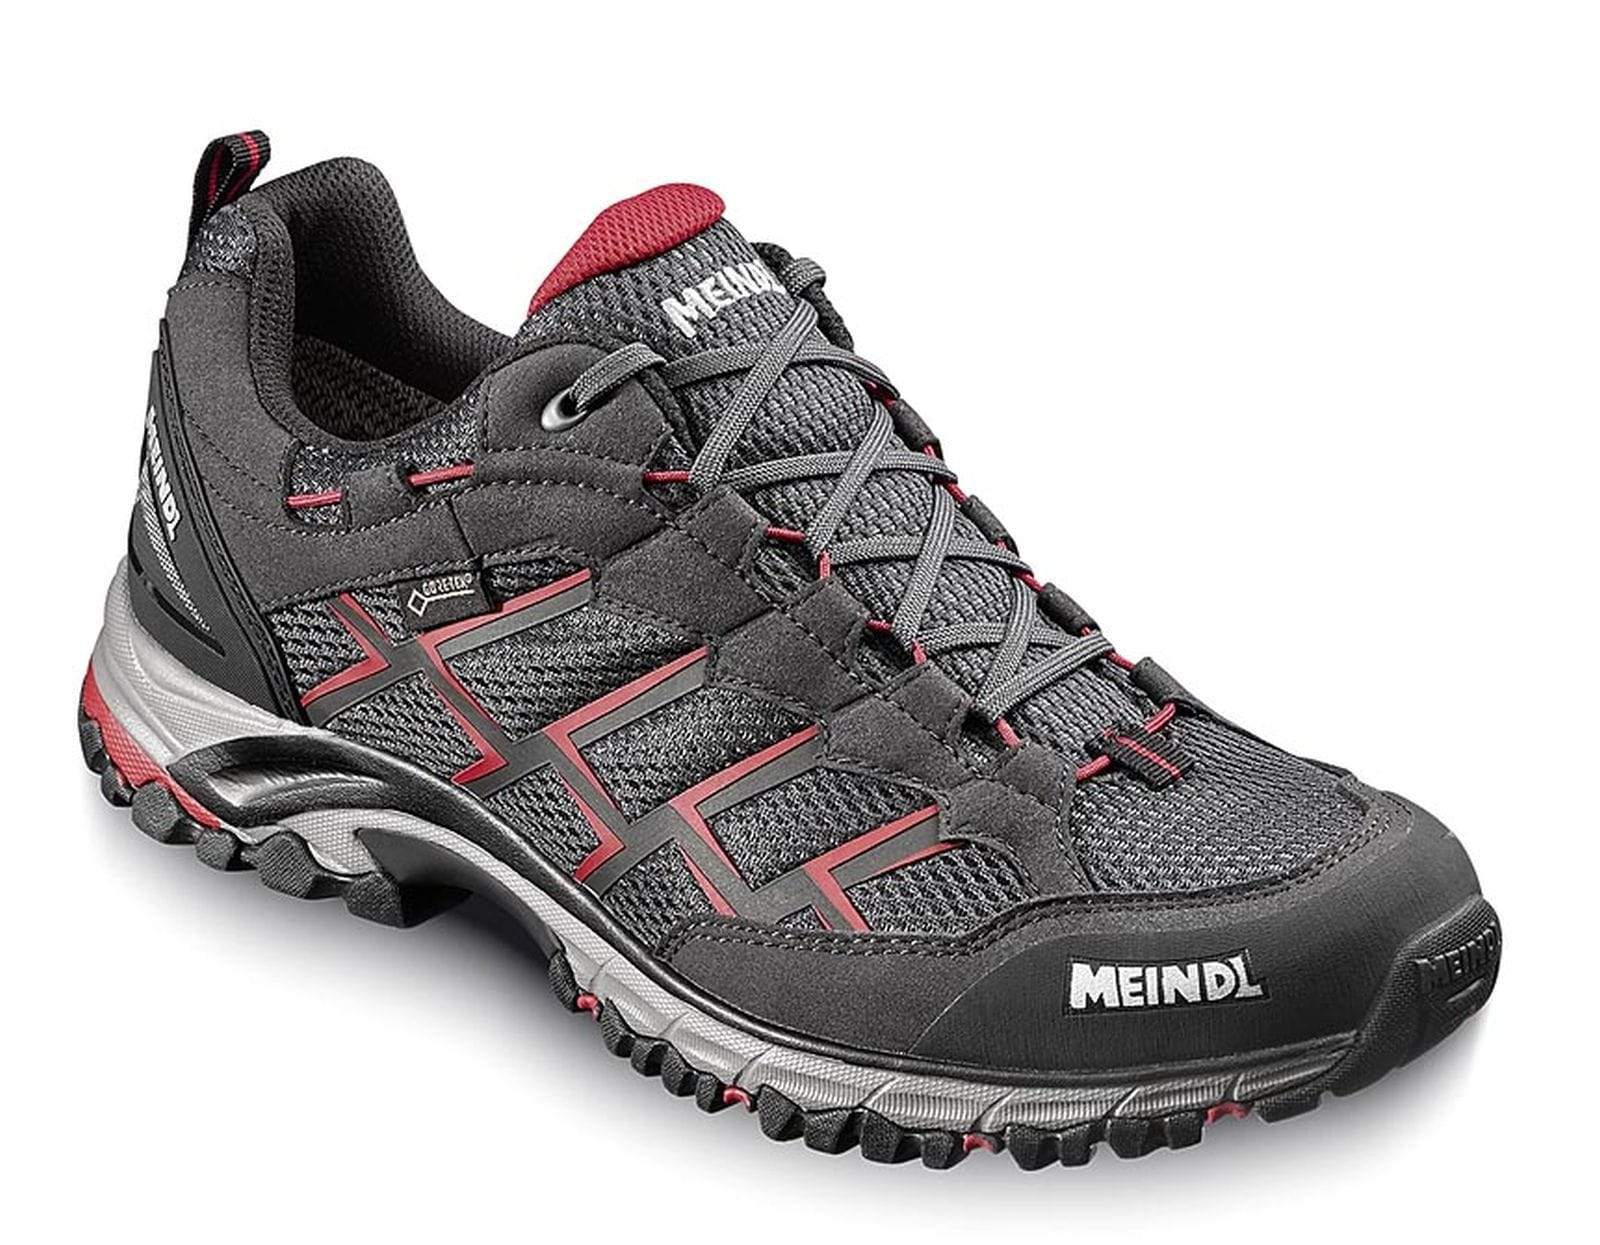 Meindl Shoes 9 UK (43 EU) / Anthracite / Red Meindl Caribe GTX M's